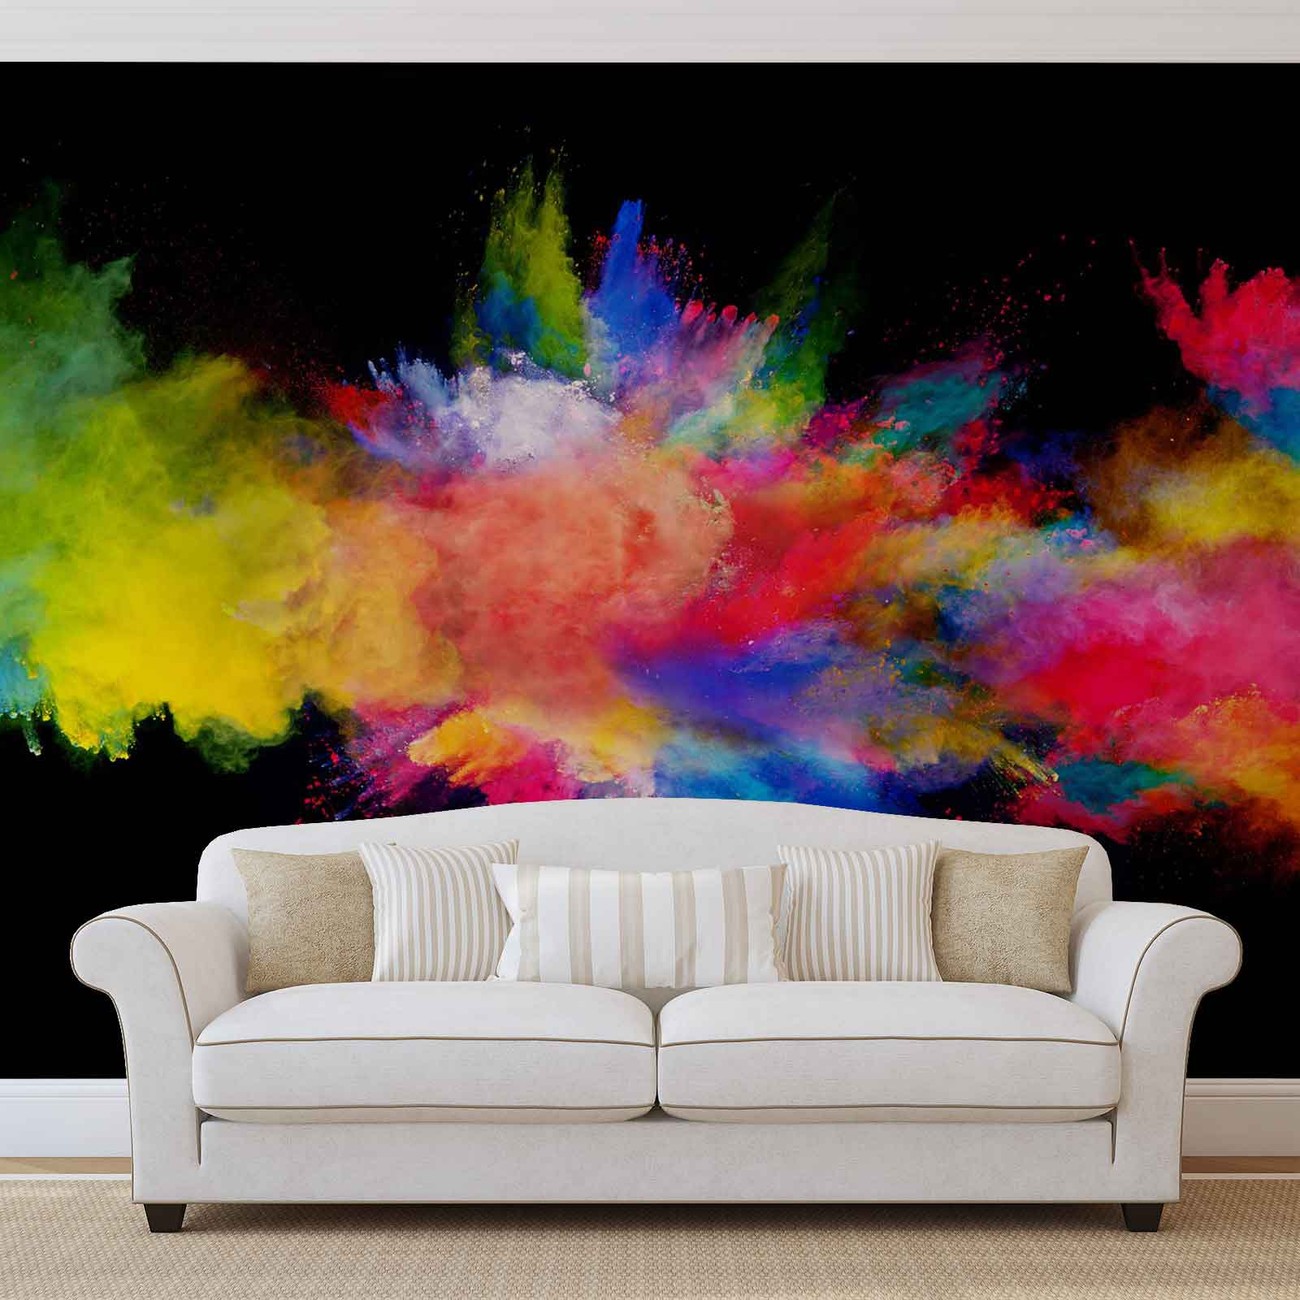 Colour Explosion Wall Paper Mural | Buy at EuroPosters